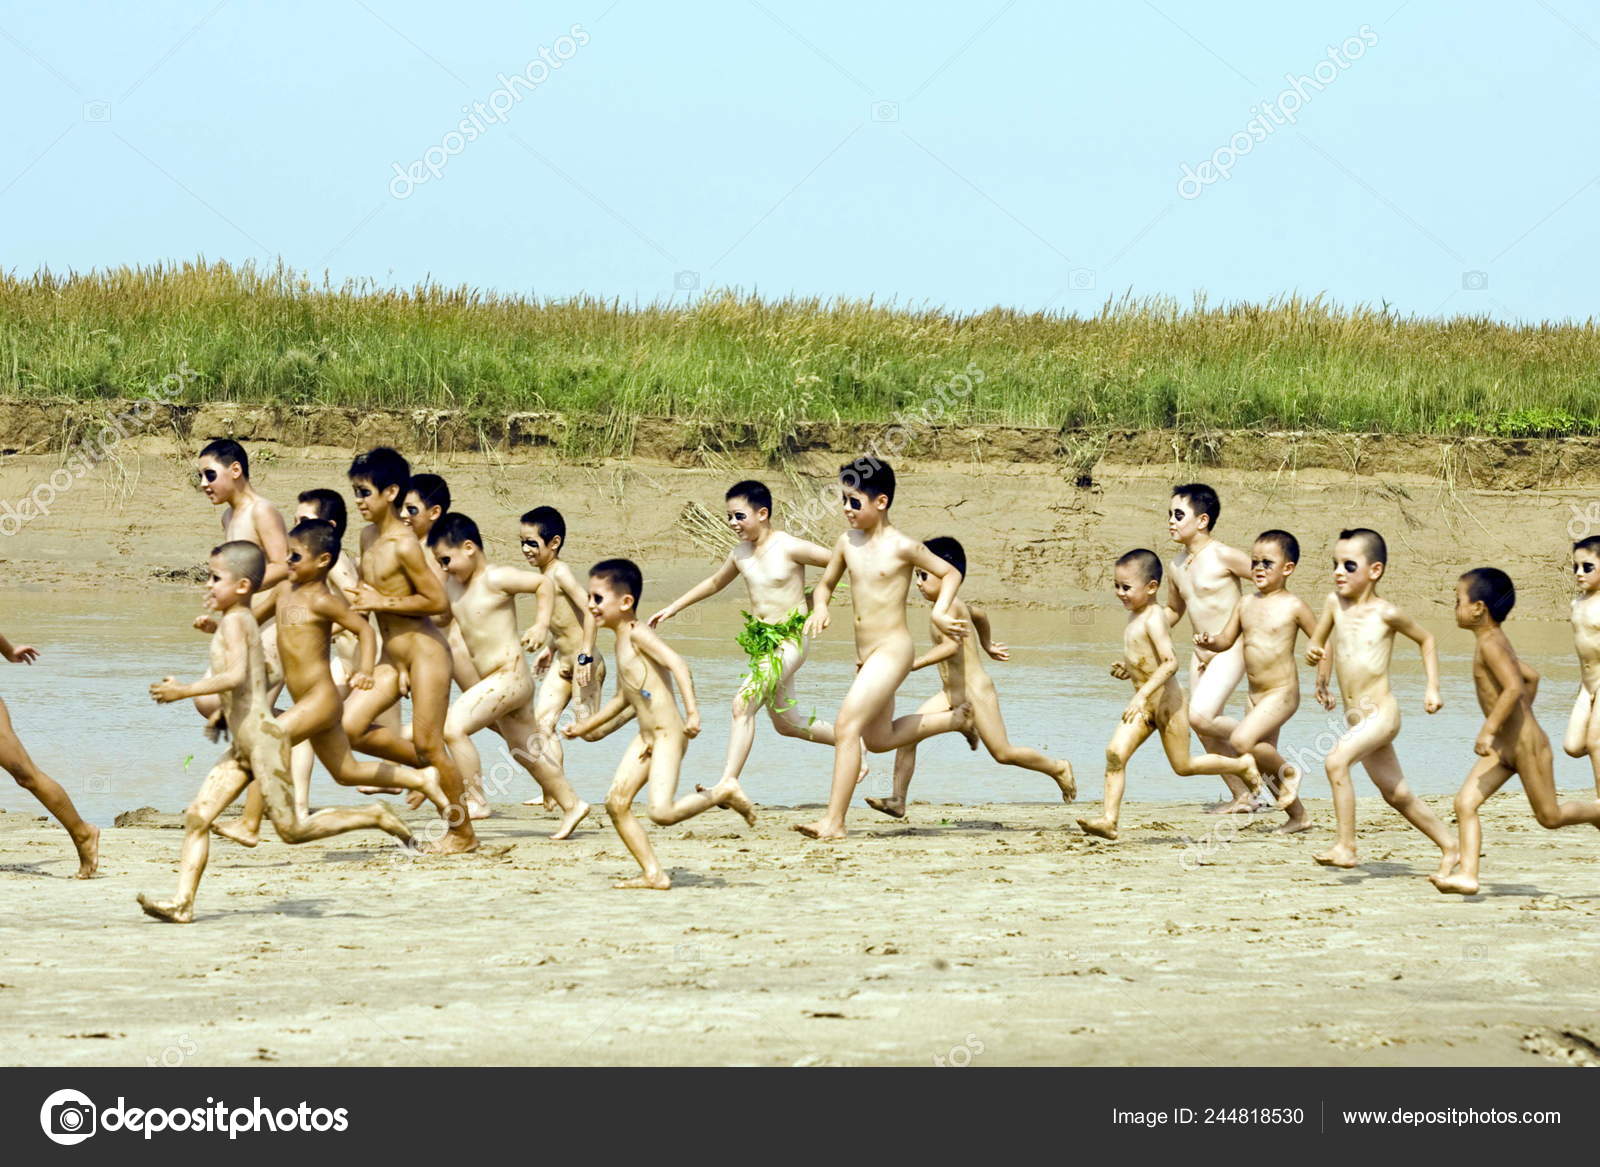 Nude of sports in Qingdao